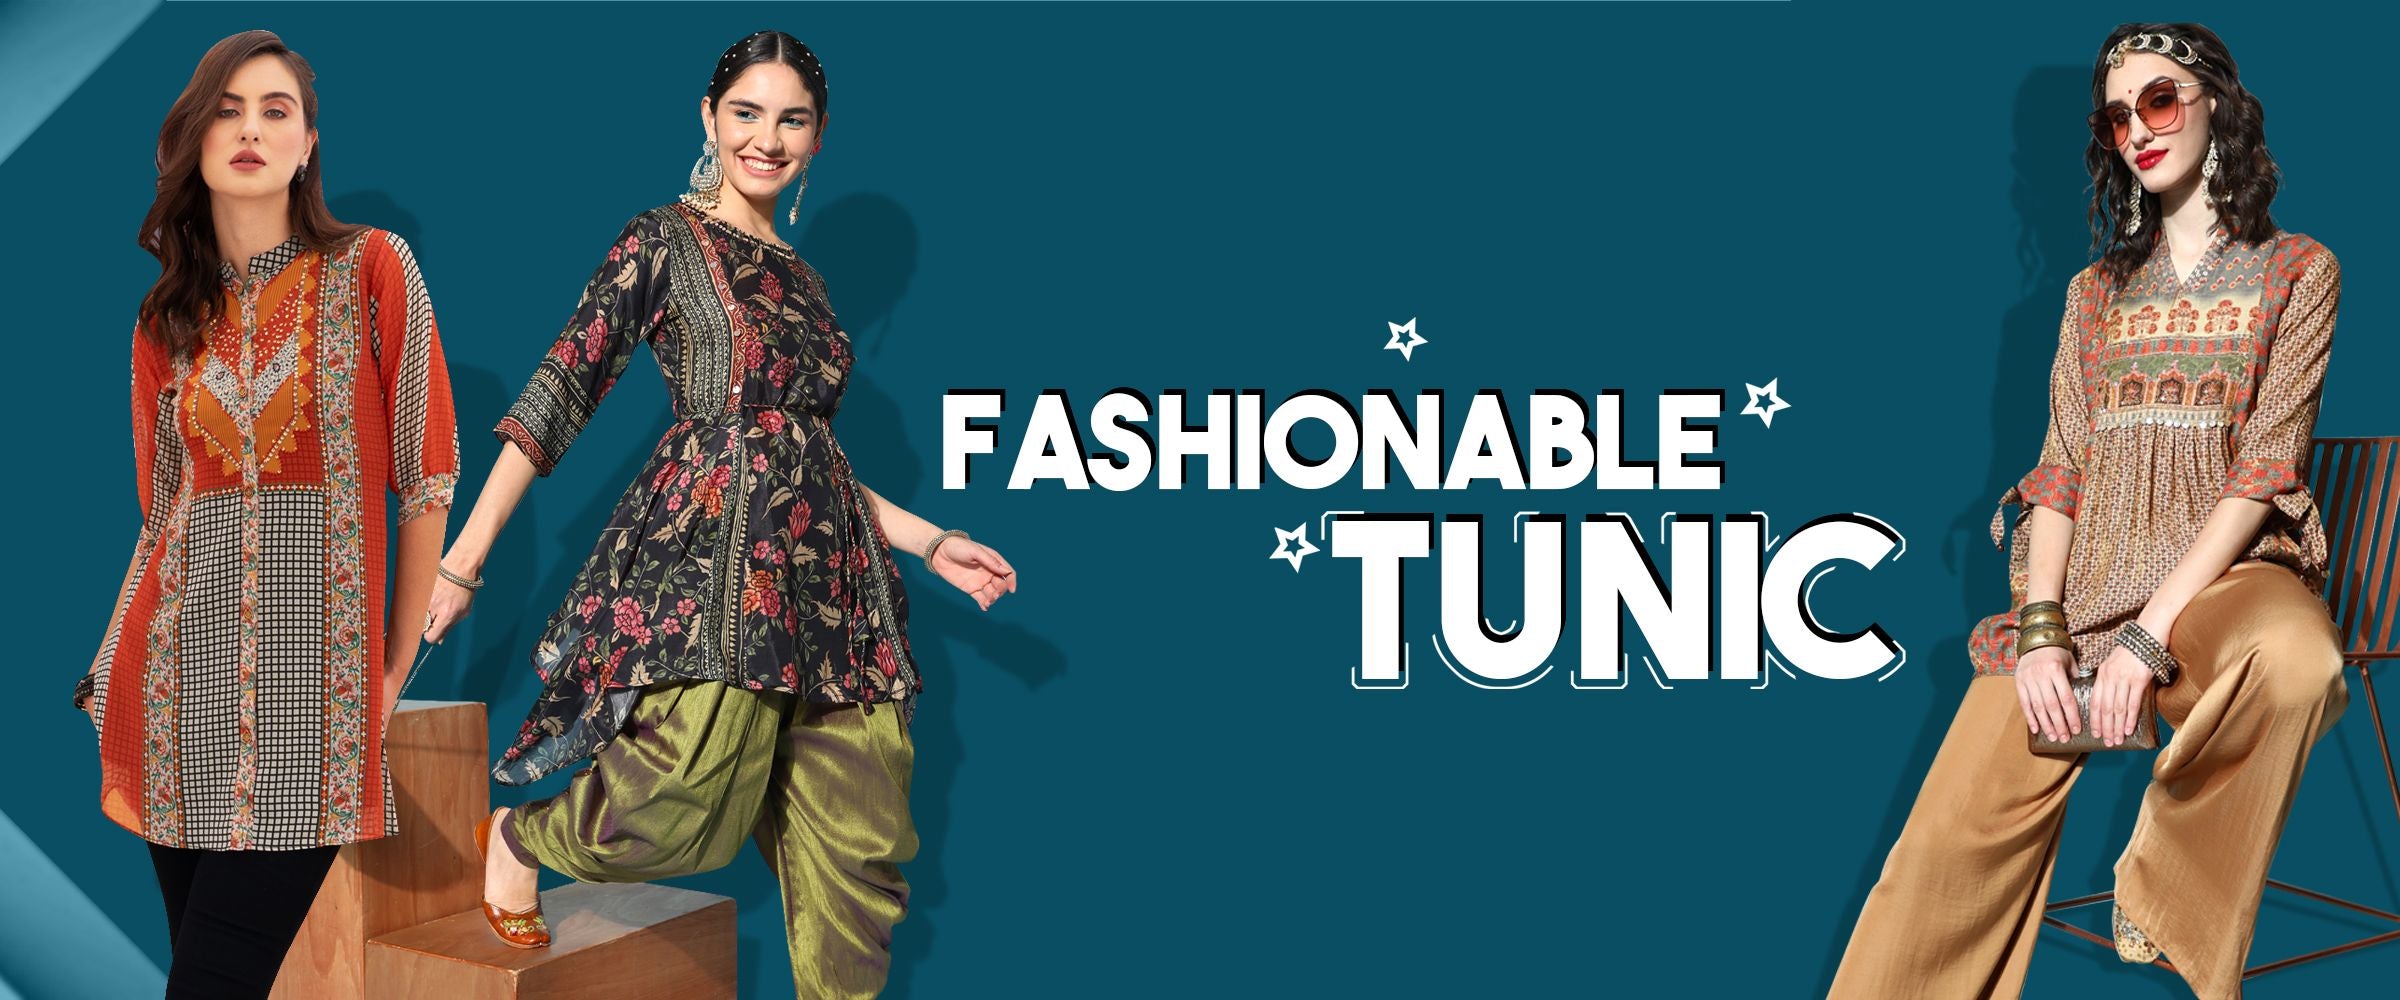 tunic #kurti #with #jeans #tunickurtiwithjeans | Cotton kurti designs, Kurti  designs, Short kurti designs